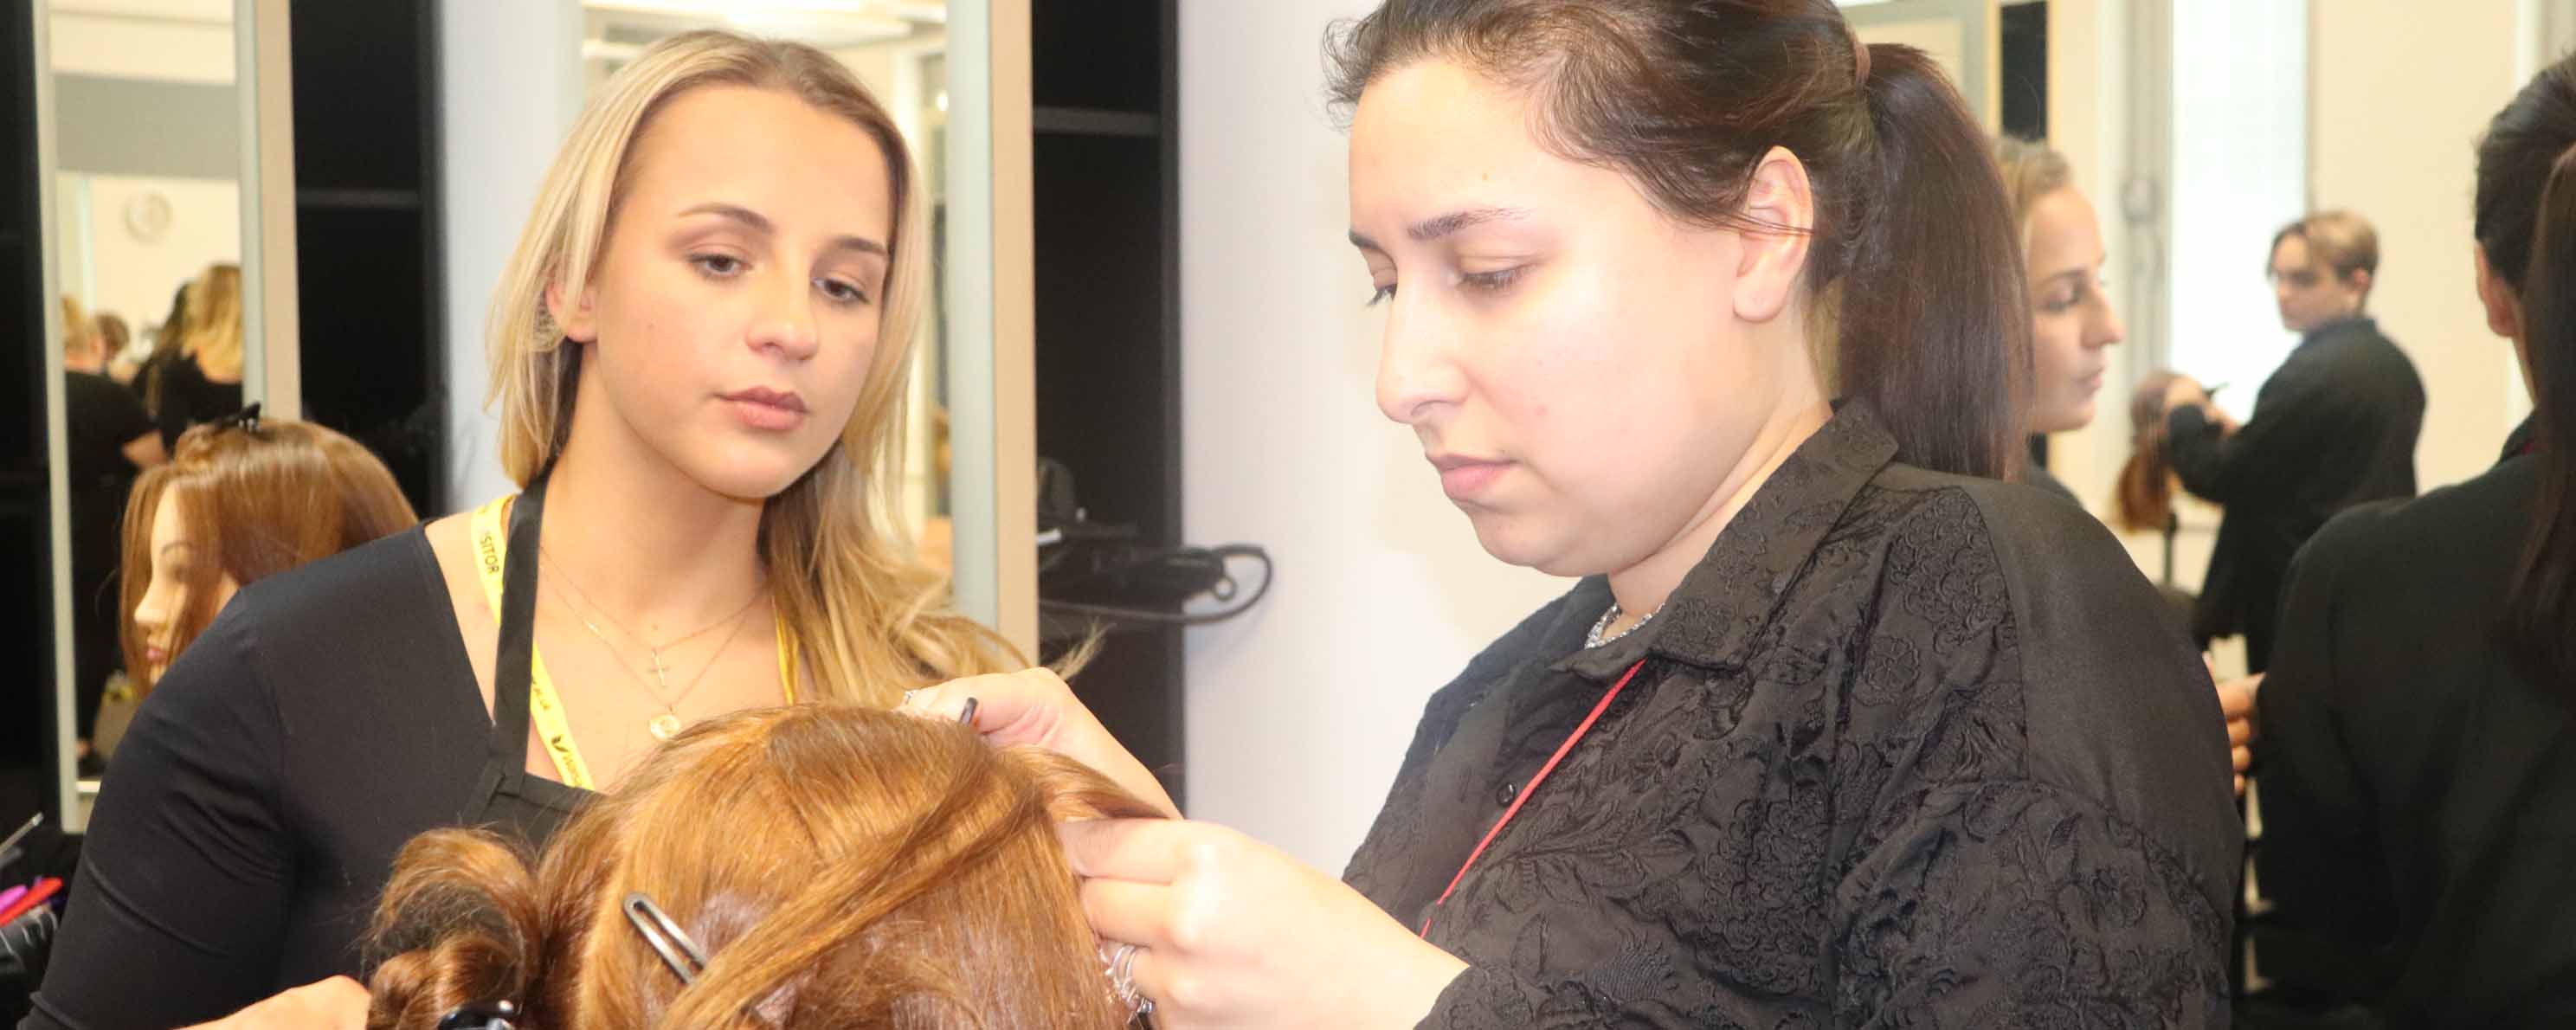 student hairdresser adjusts mannequin head hair watched by employer